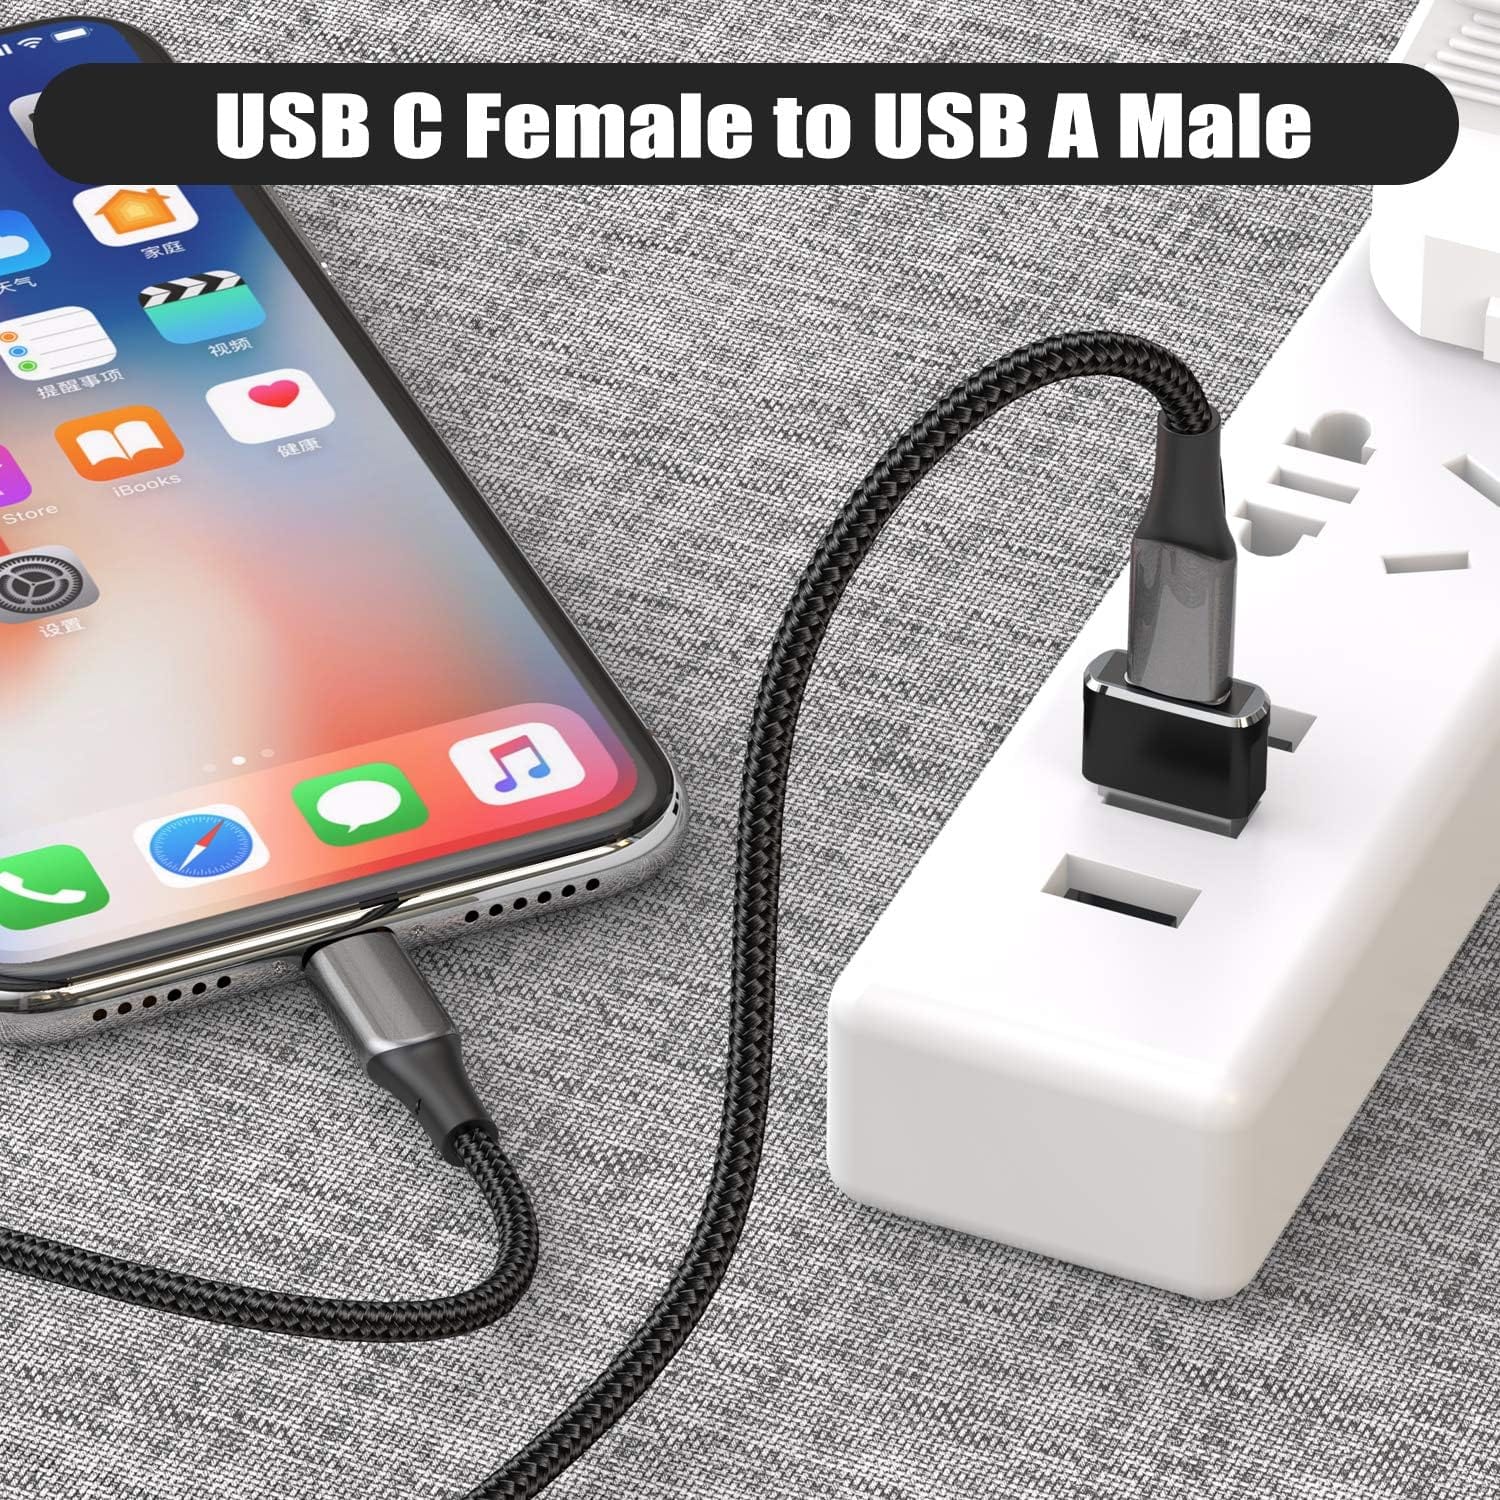 USB to USB C Adapter Cable 3-Pack - USB C Female to USB A Male Charger Cable Converter for Apple iWatch 8 7, MacBook, iPhone 12 13 14 15 Max Pro, Airpods, iPad 10 Air 4 5 Mini 6, CarPlay, Galaxy S23 S24 A34 by BASESAILOR